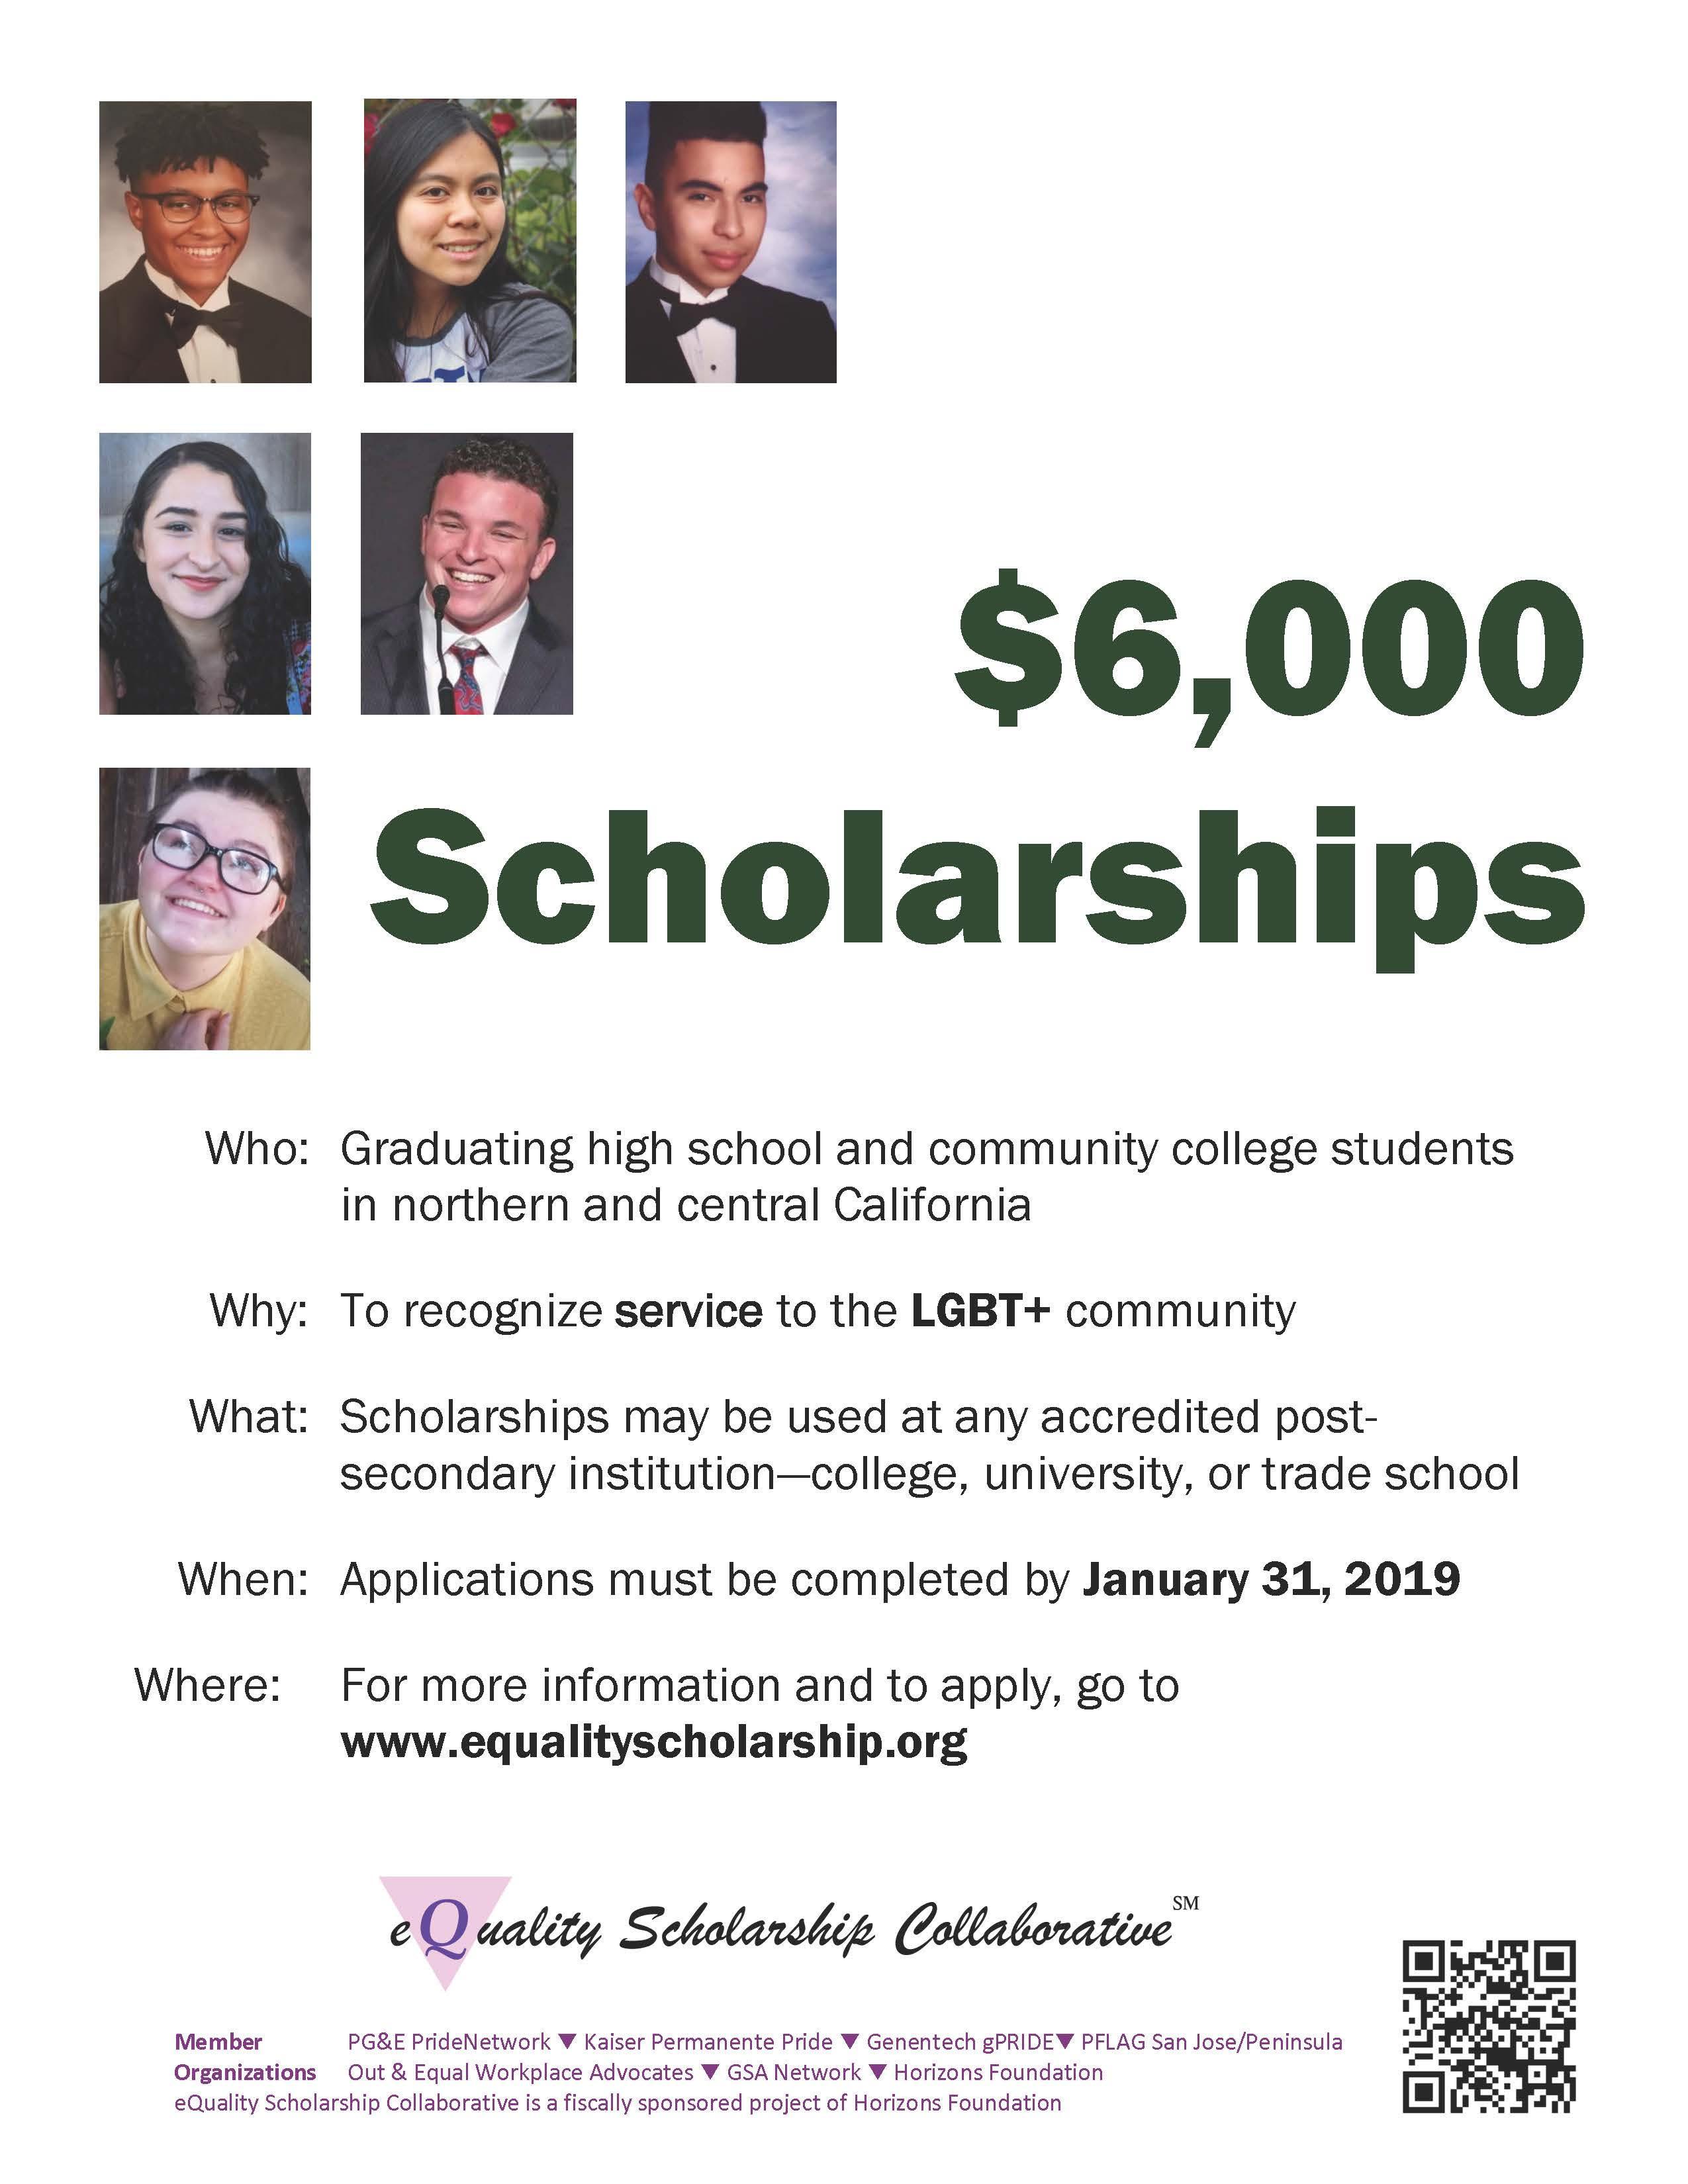 equality scholarship; visit www.equalityscholarship.org for details